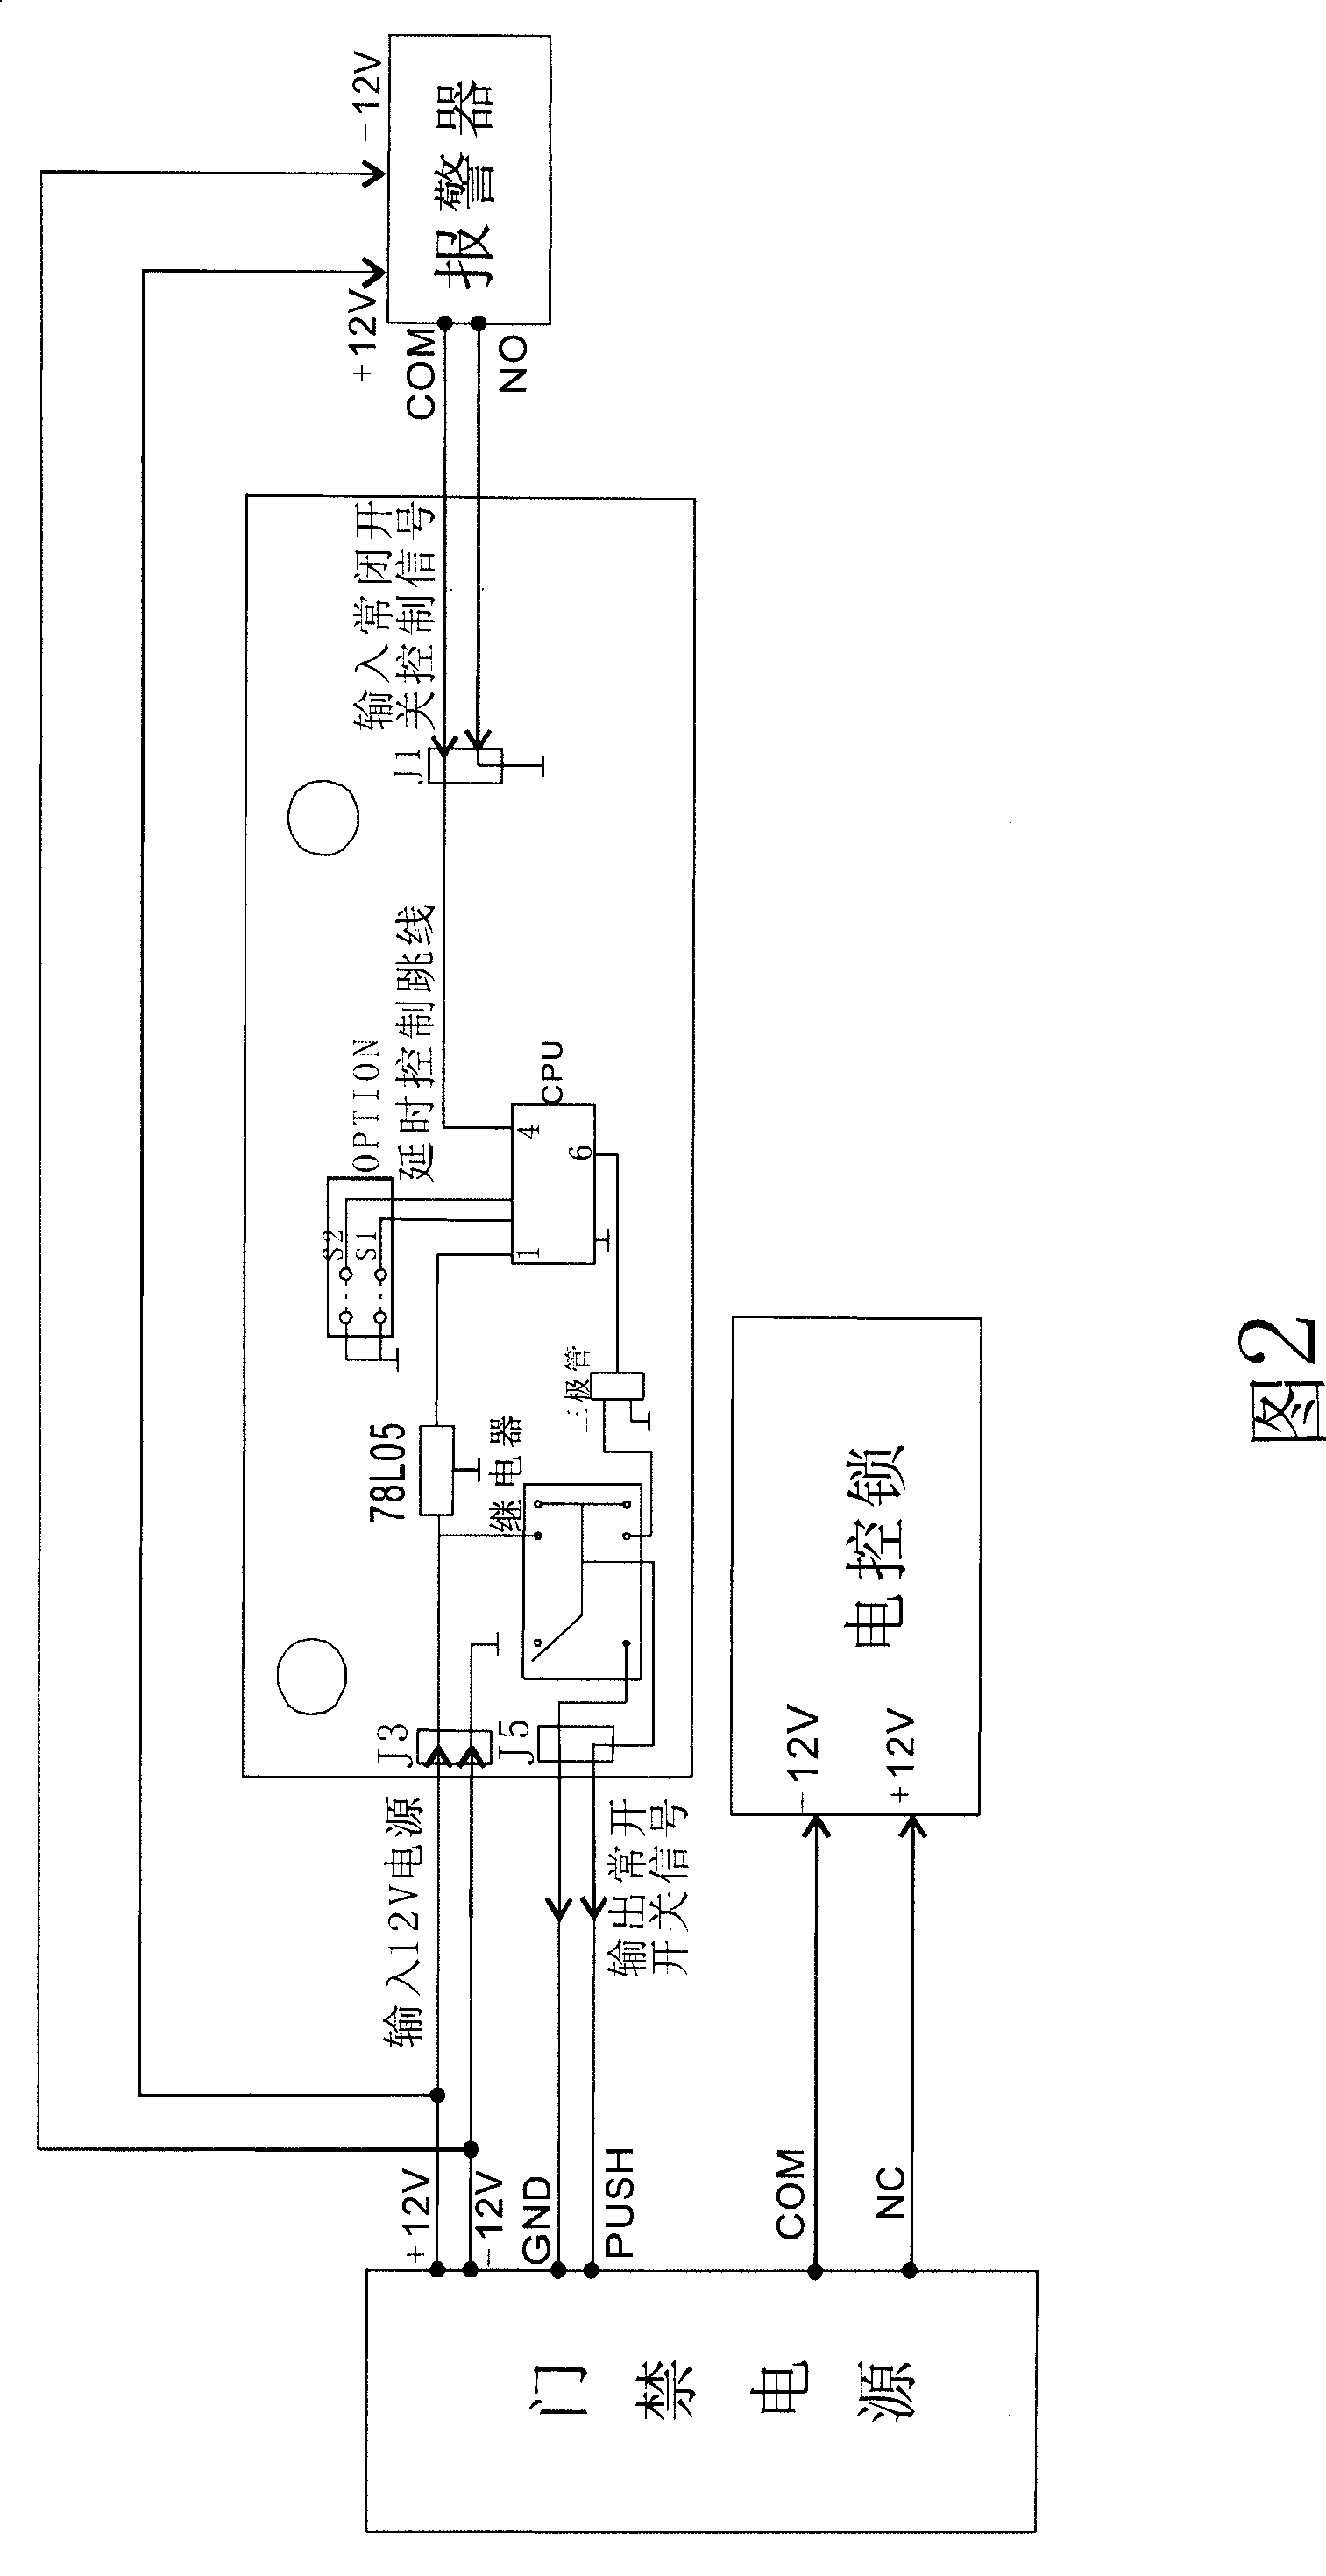 Integrated circuit for controlling time-delay by time-delay module